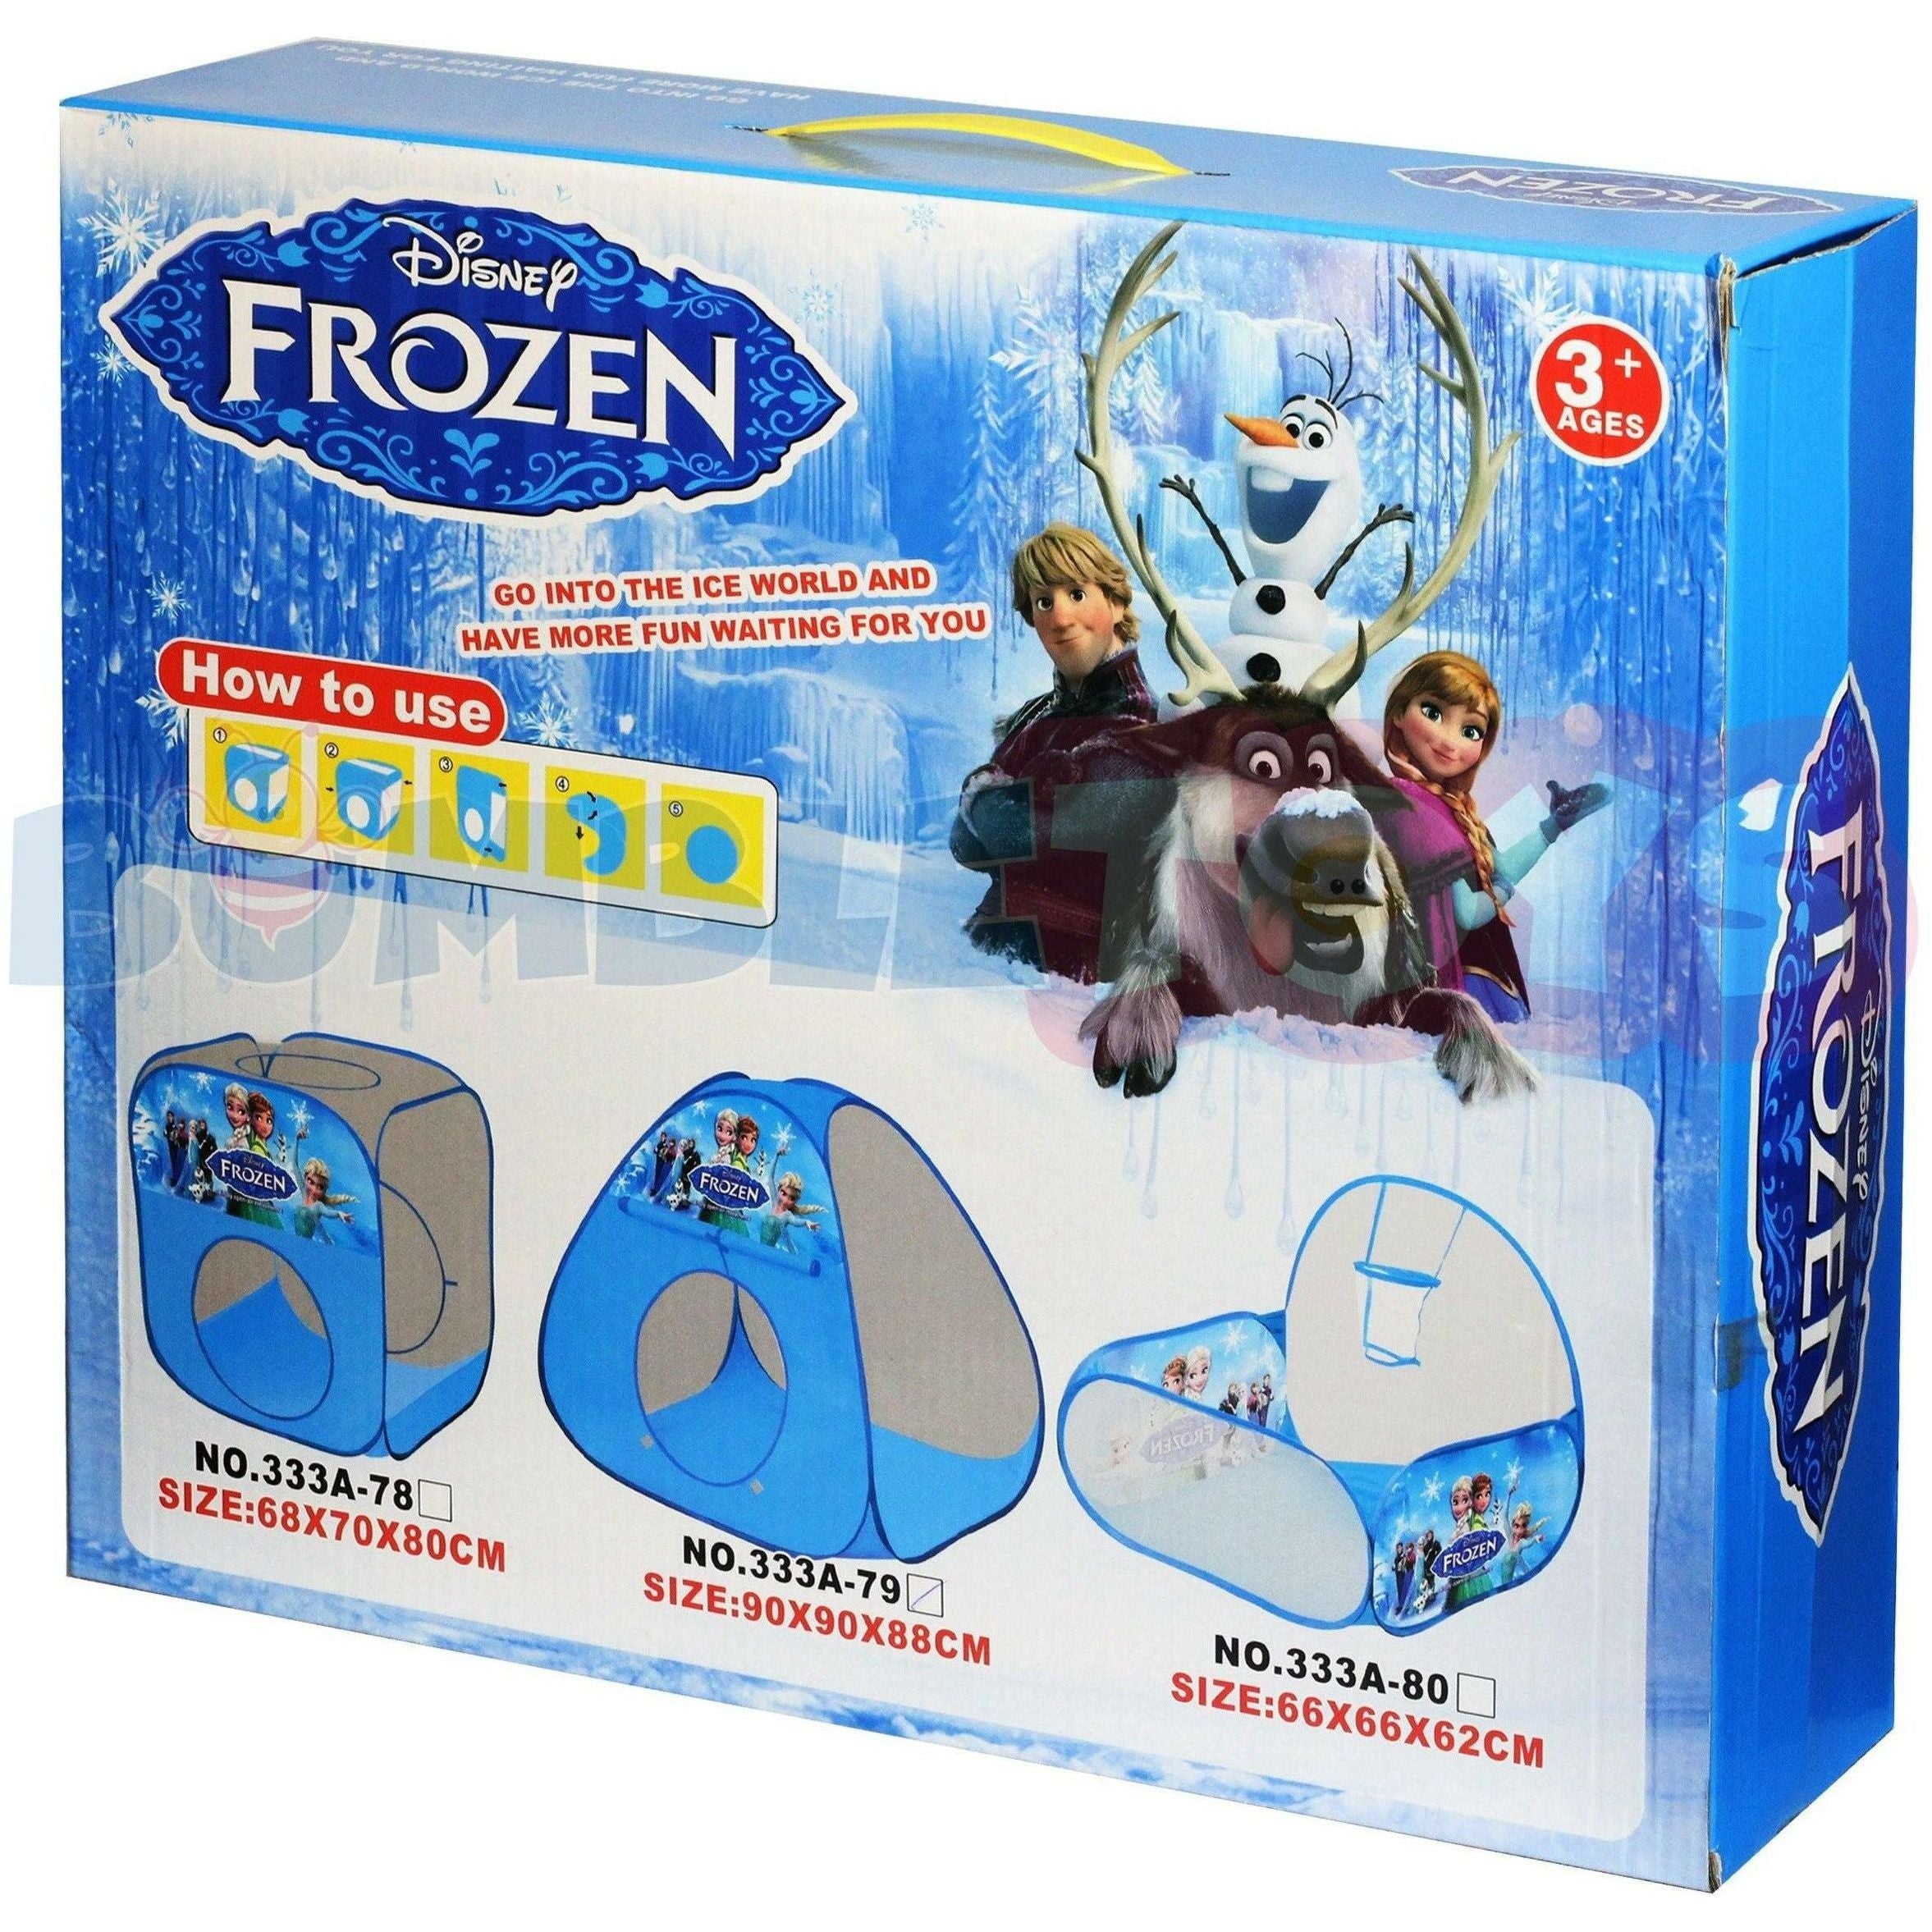 Frozen Ball Tent With 50 Balls For Kids - BumbleToys - 5-7 Years, Boys, El Rowad, Frozen, Girls, Tent